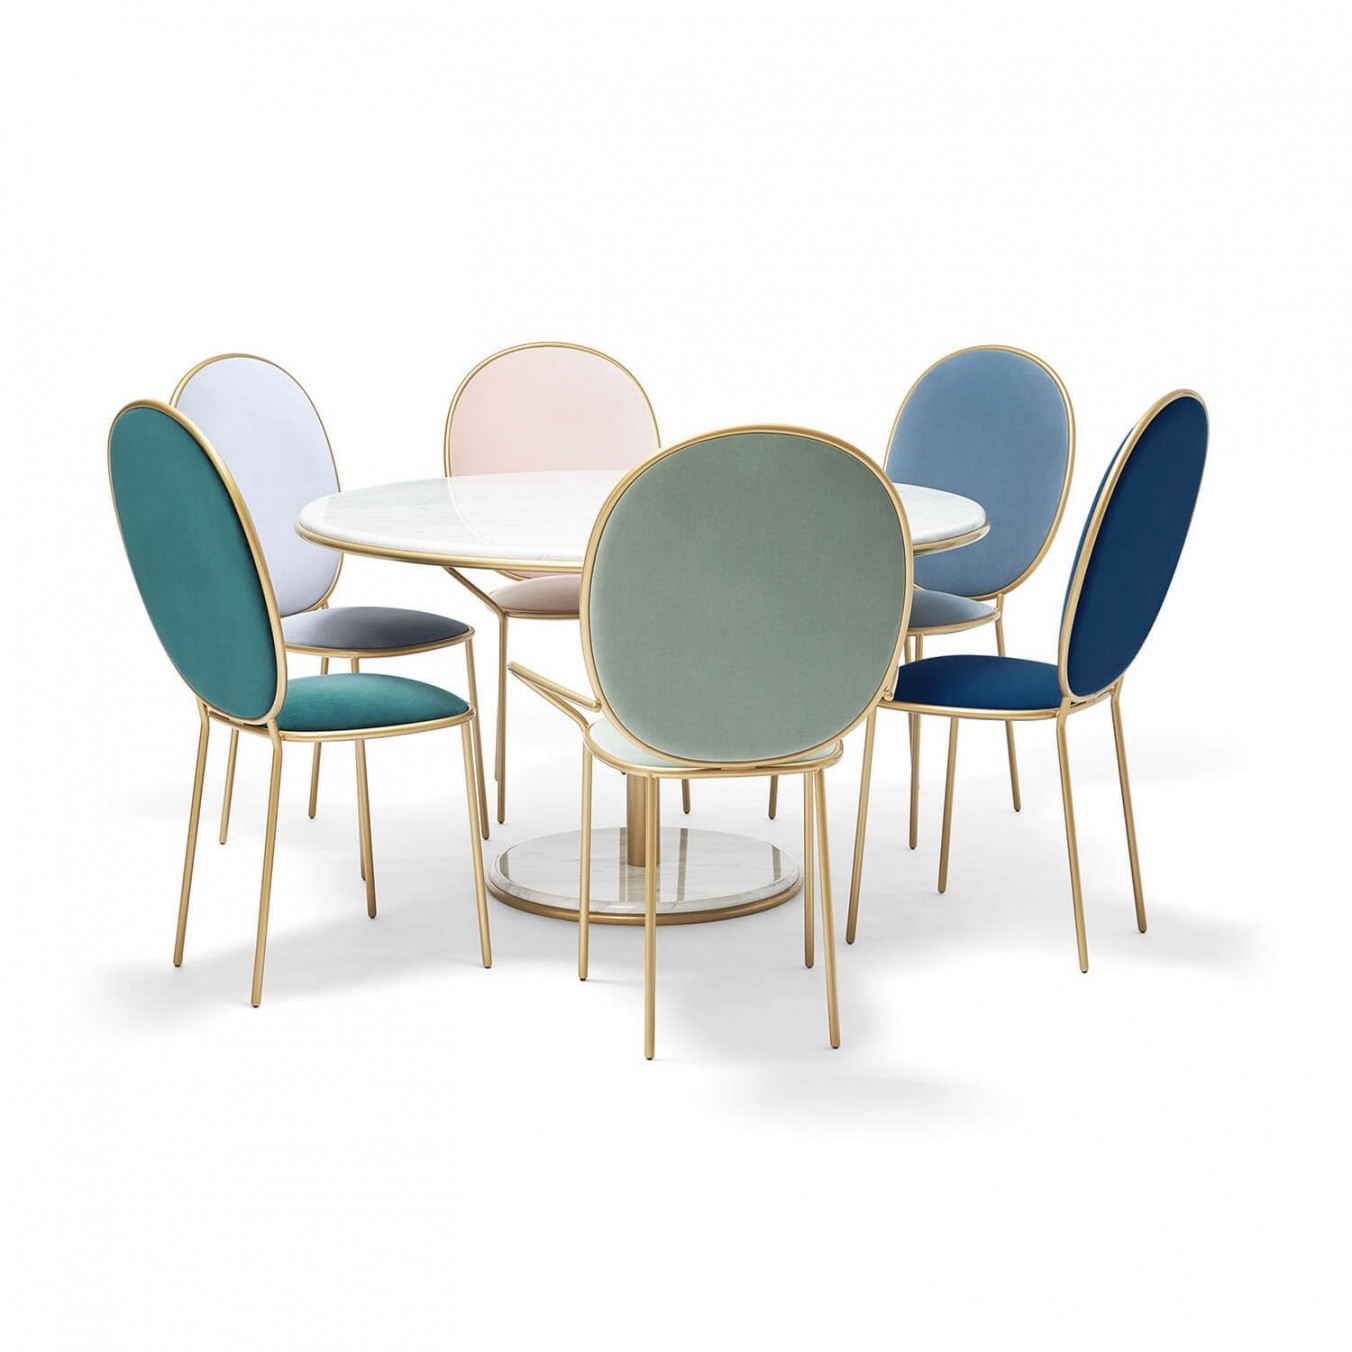 Stay Dining Armchair